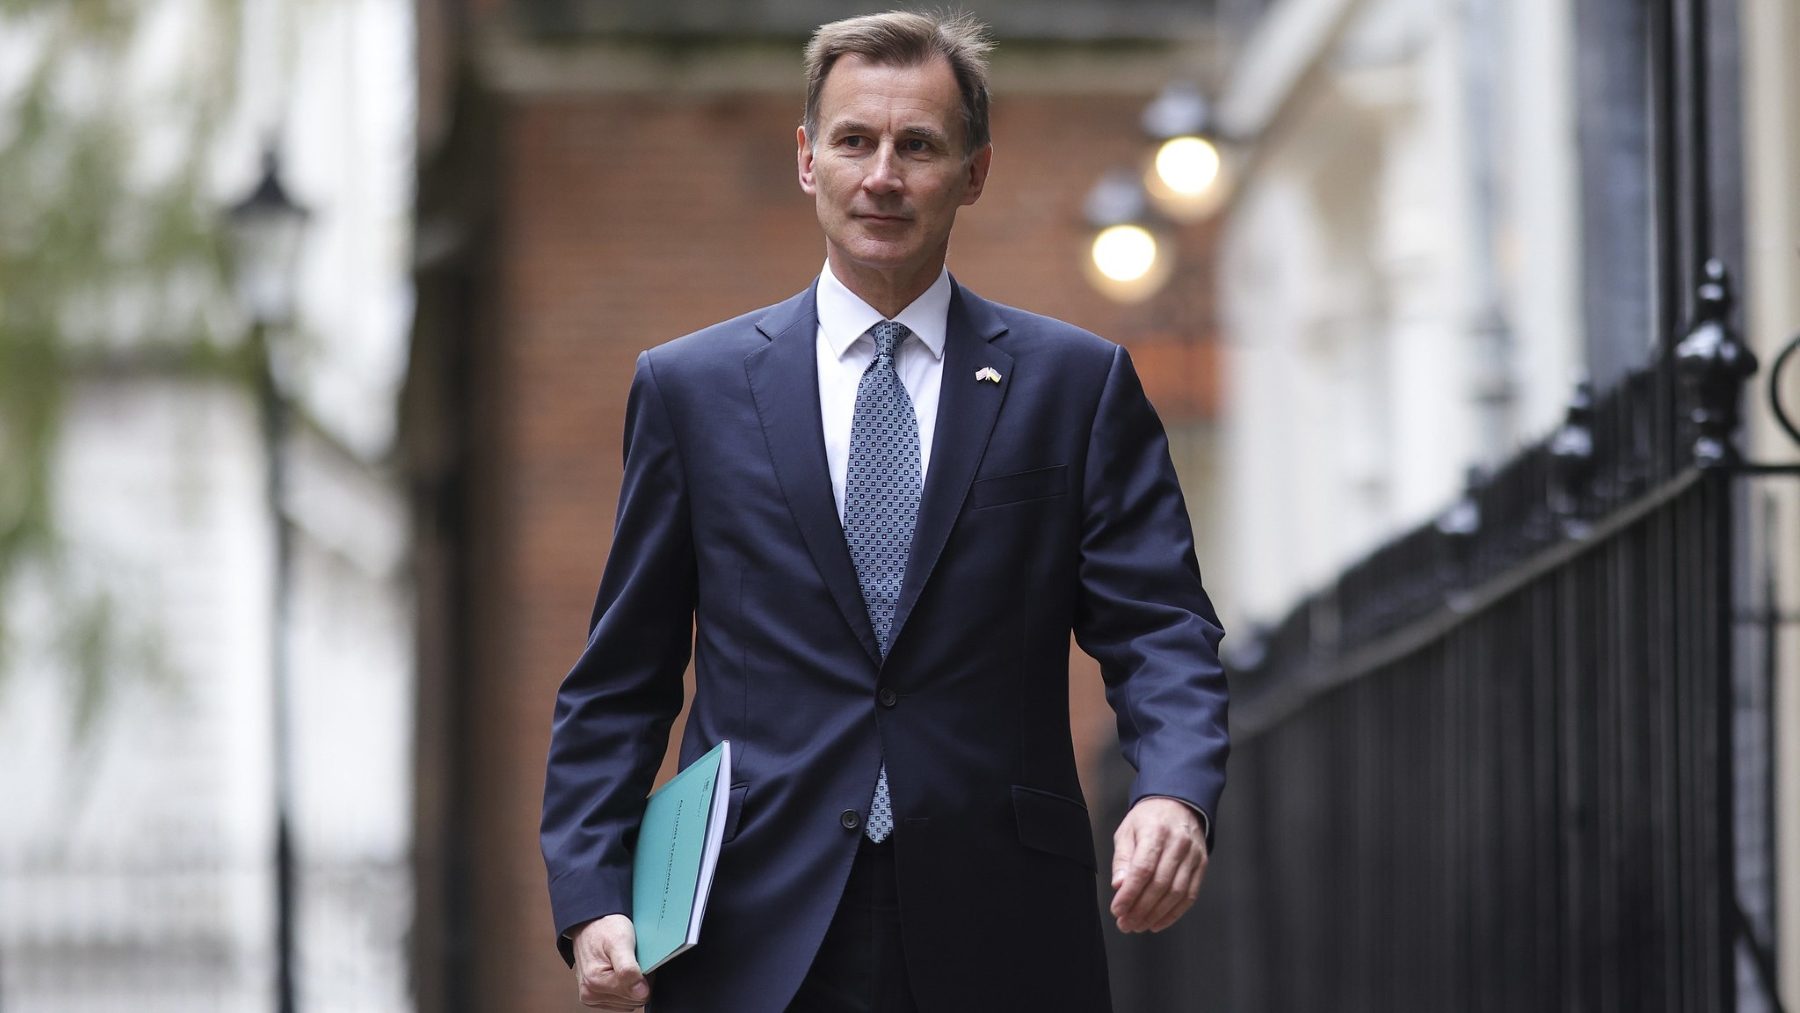 Autumn Statement: UK tech reacts to Hunt’s ‘next Silicon Valley’ goal